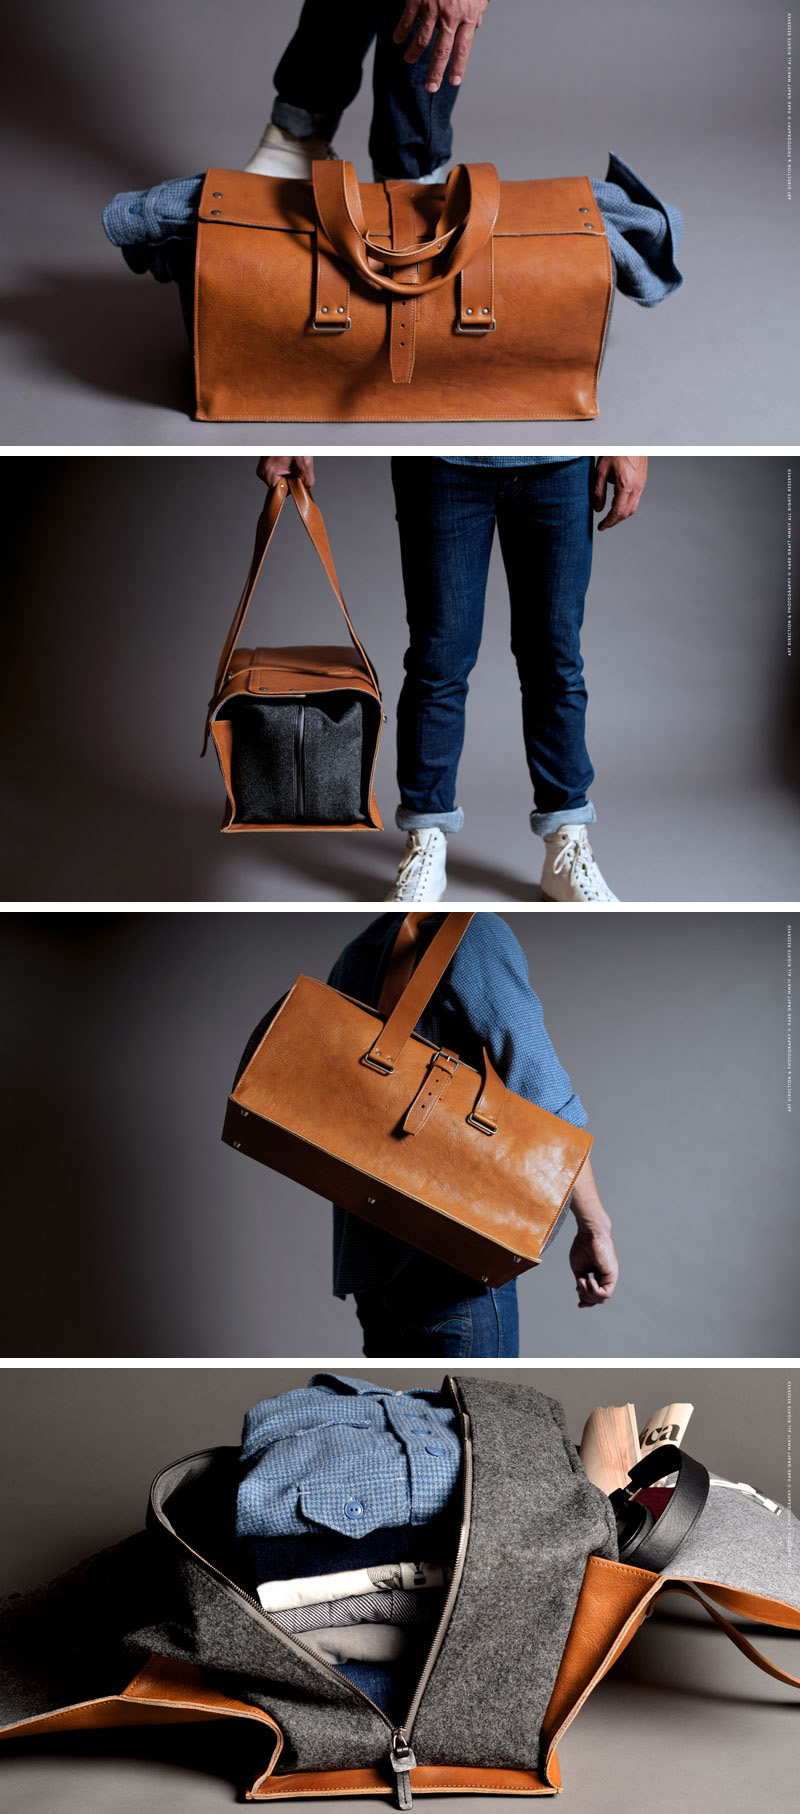 This modern light brown duffel bag protects your clothes in more ways than one - a felt interior zips up to keep your clothes all organised and a leather exterior wraps around the outside to give you more storage and additional protection for your clothes inside.